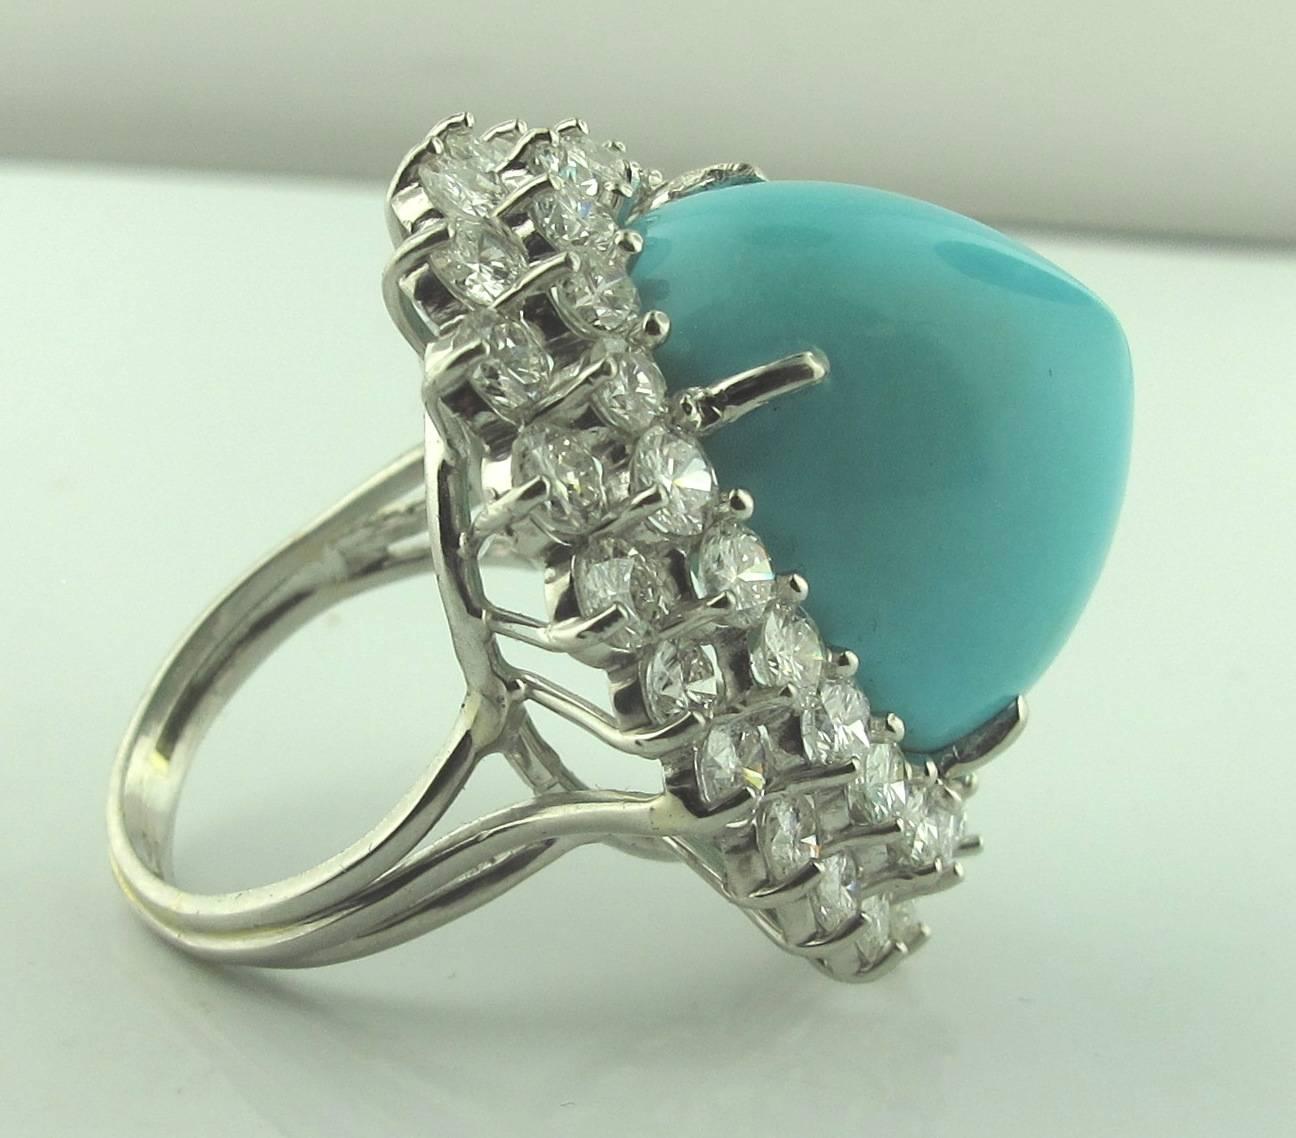 18 Karat White Gold Sugarloaf Persian Turquoise with 2 rows of round brilliant diamonds with a total diamond weight of approximately 5.00 carats - G-H color, VS clarity.
Exceptional quality Persian turquoise.   Ring Size:  6.5